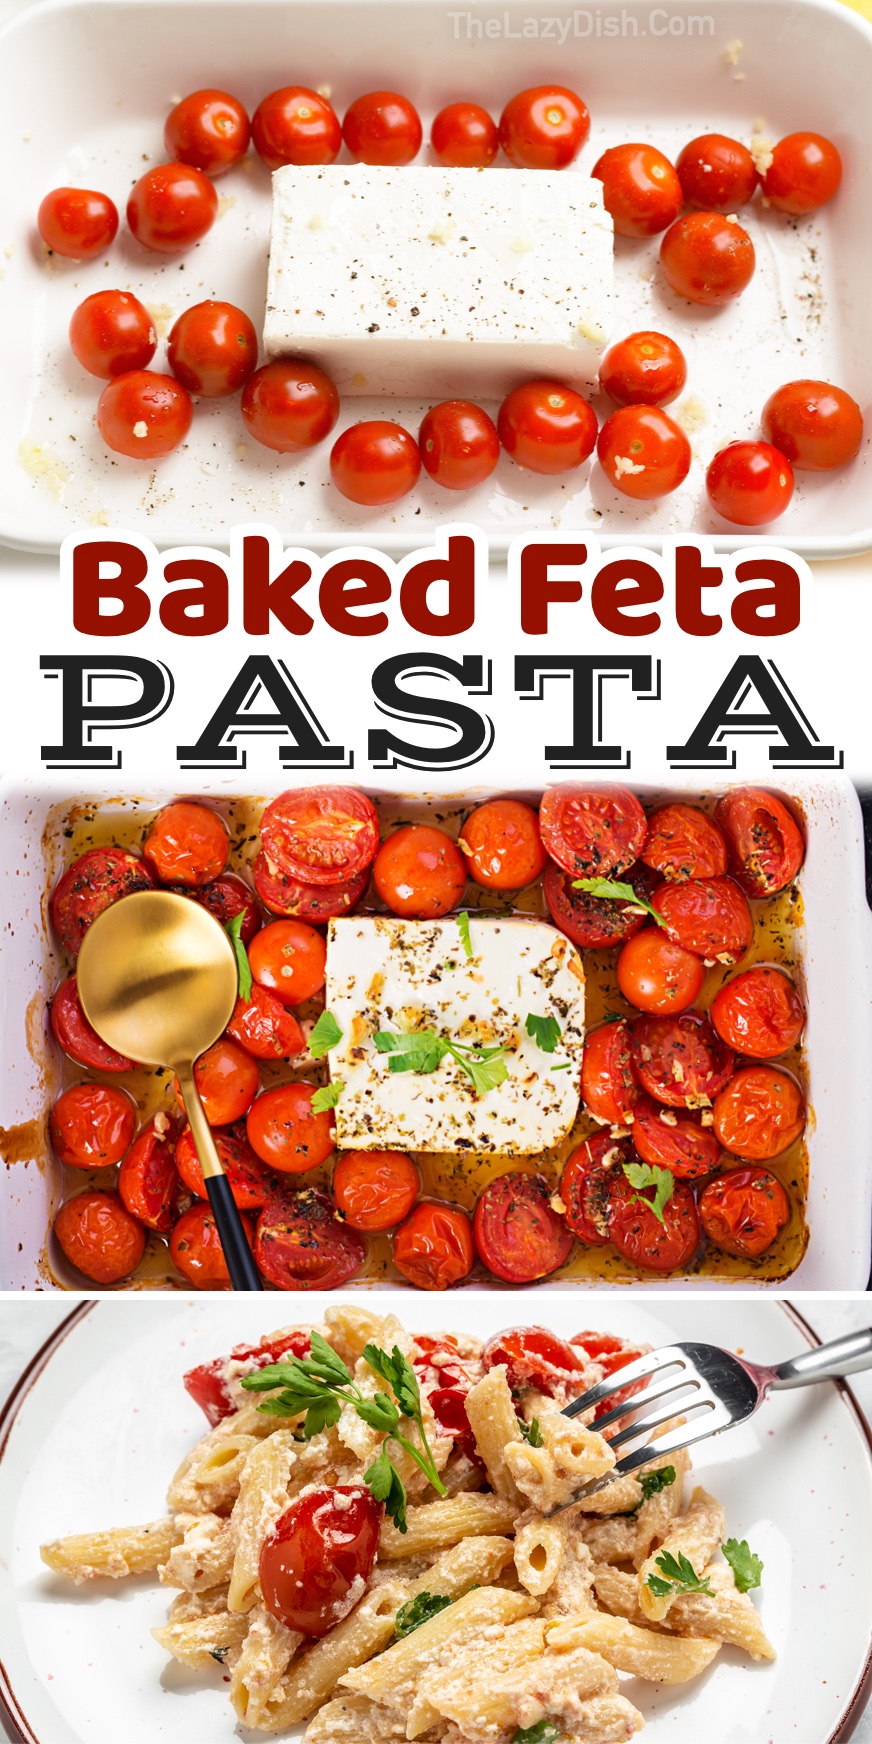 Baked Feta Pasta Dinner | A quick and easy Italian inspired pasta recipe! This recipe went viral on Tik Tok, and for a reason! It's fresh, healthy, delicious, and vegetarian. It's a total hit with my family! We sometimes add grilled or rotisserie chicken. It's just as good leftover, so we usually get at least two meals out of it. 